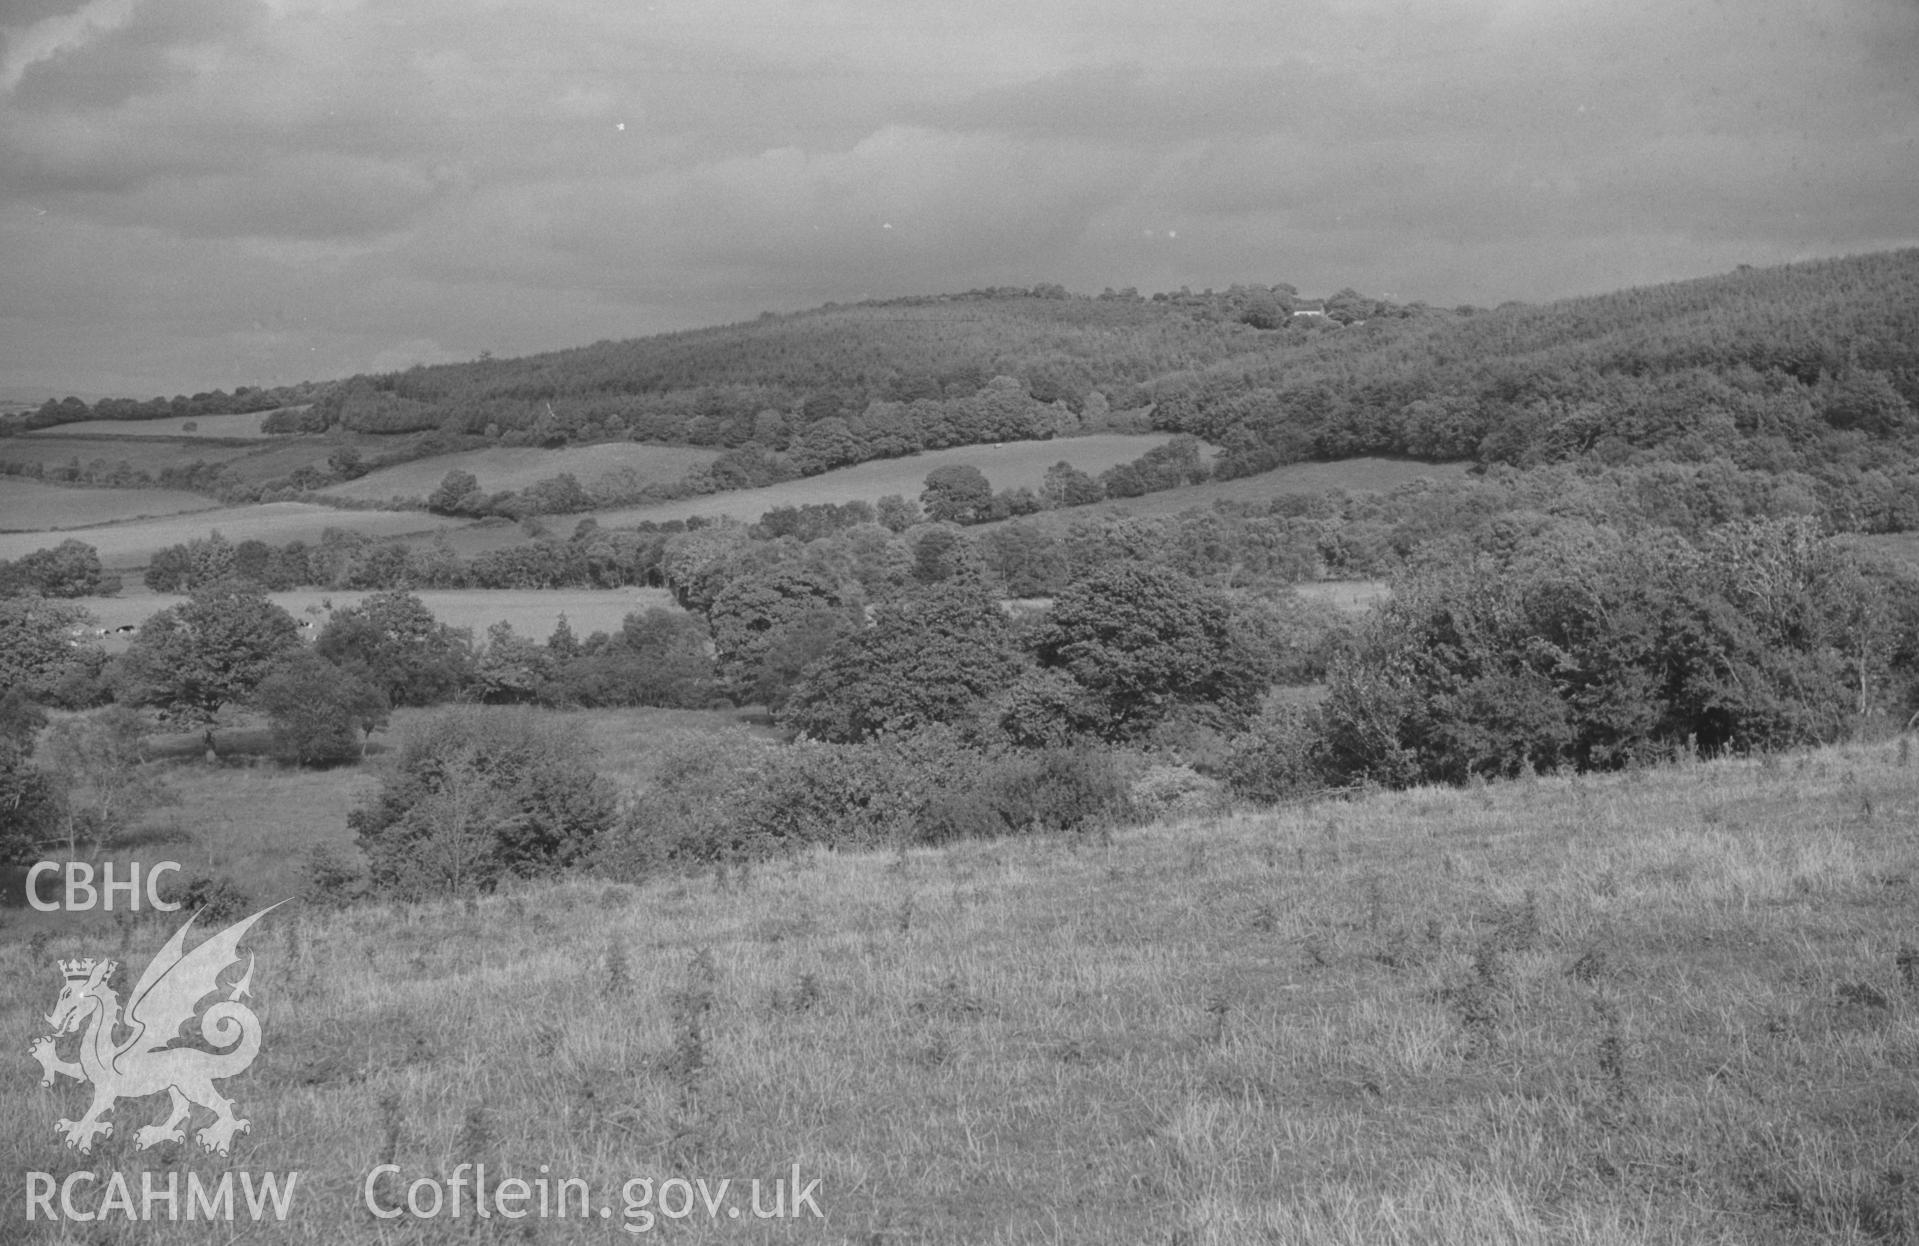 Digital copy of a black and white negative showing panoramic view of Glan Denys, Derry Ormond Monument, Dulas valley and woods by Castell Goetre. Photographed by Arthur O. Chater on 4th September 1966 from Grid Reference SN 591 505. (Photograph 1 of 6).